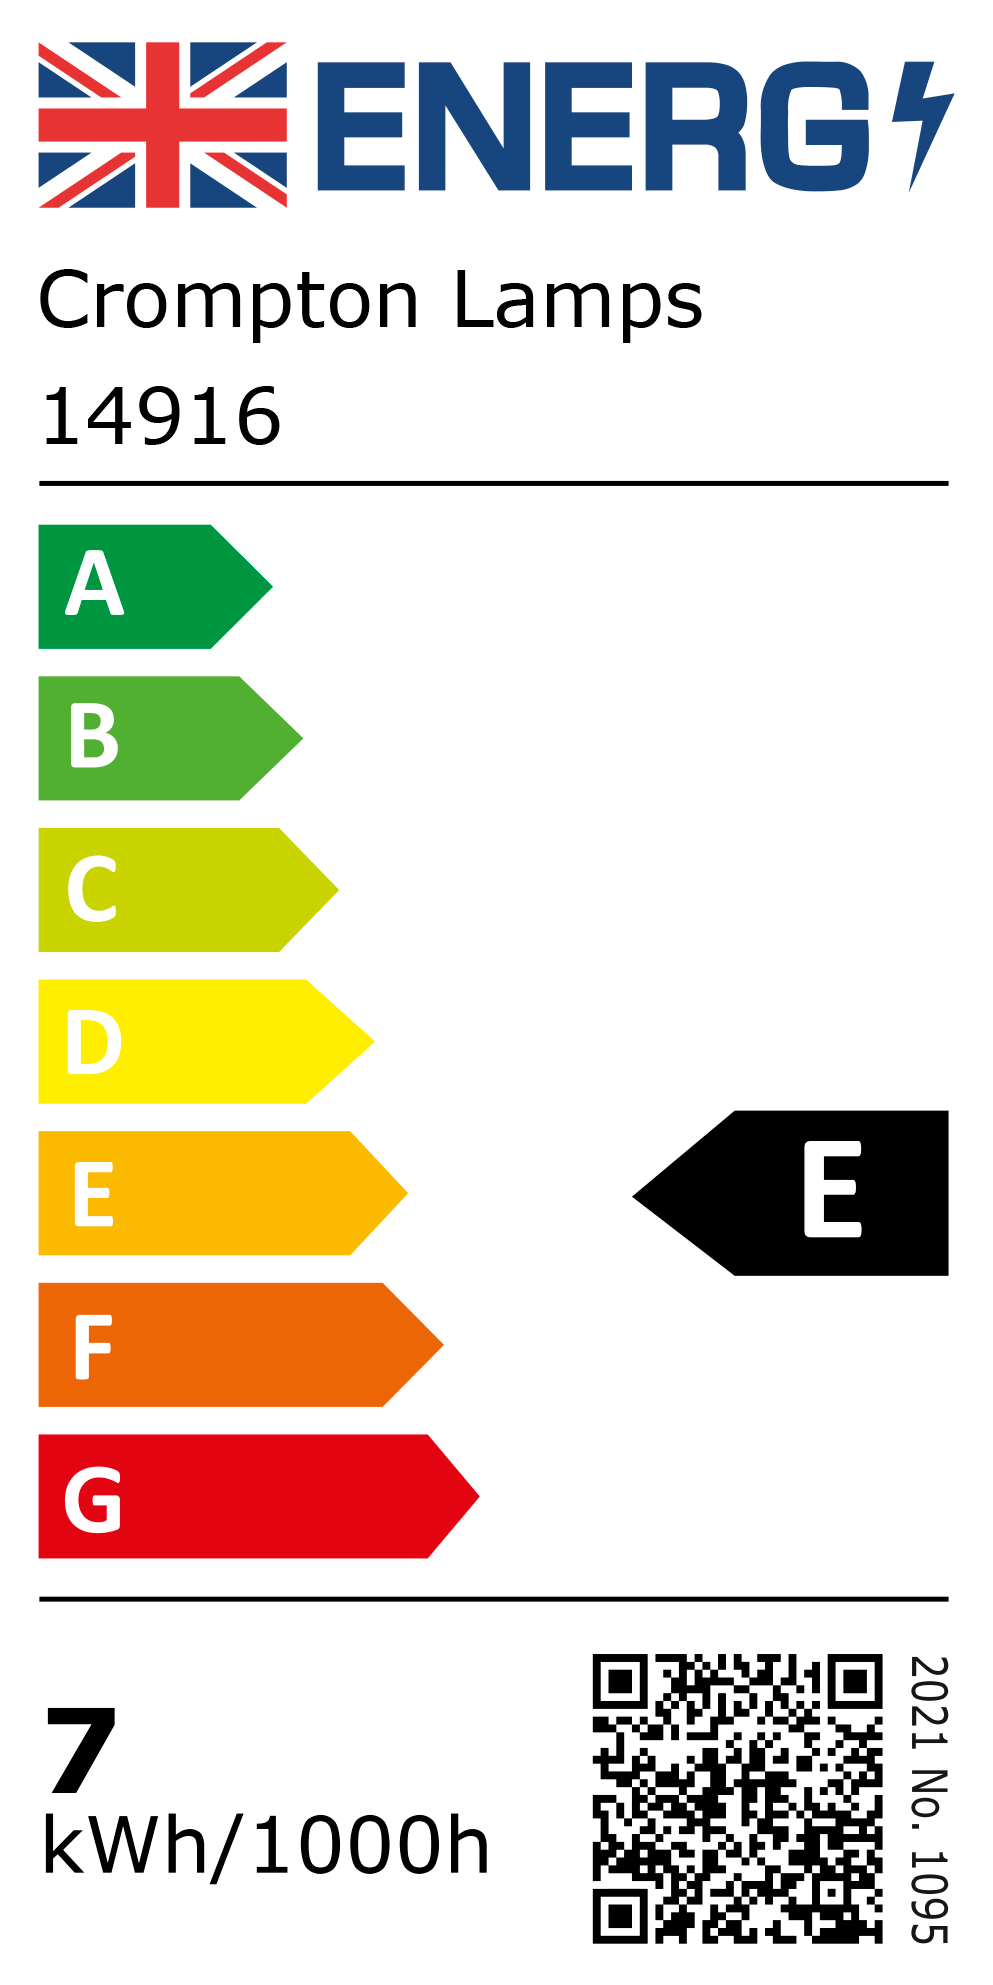 New 2021 Energy Rating Label: Stock Code 14916